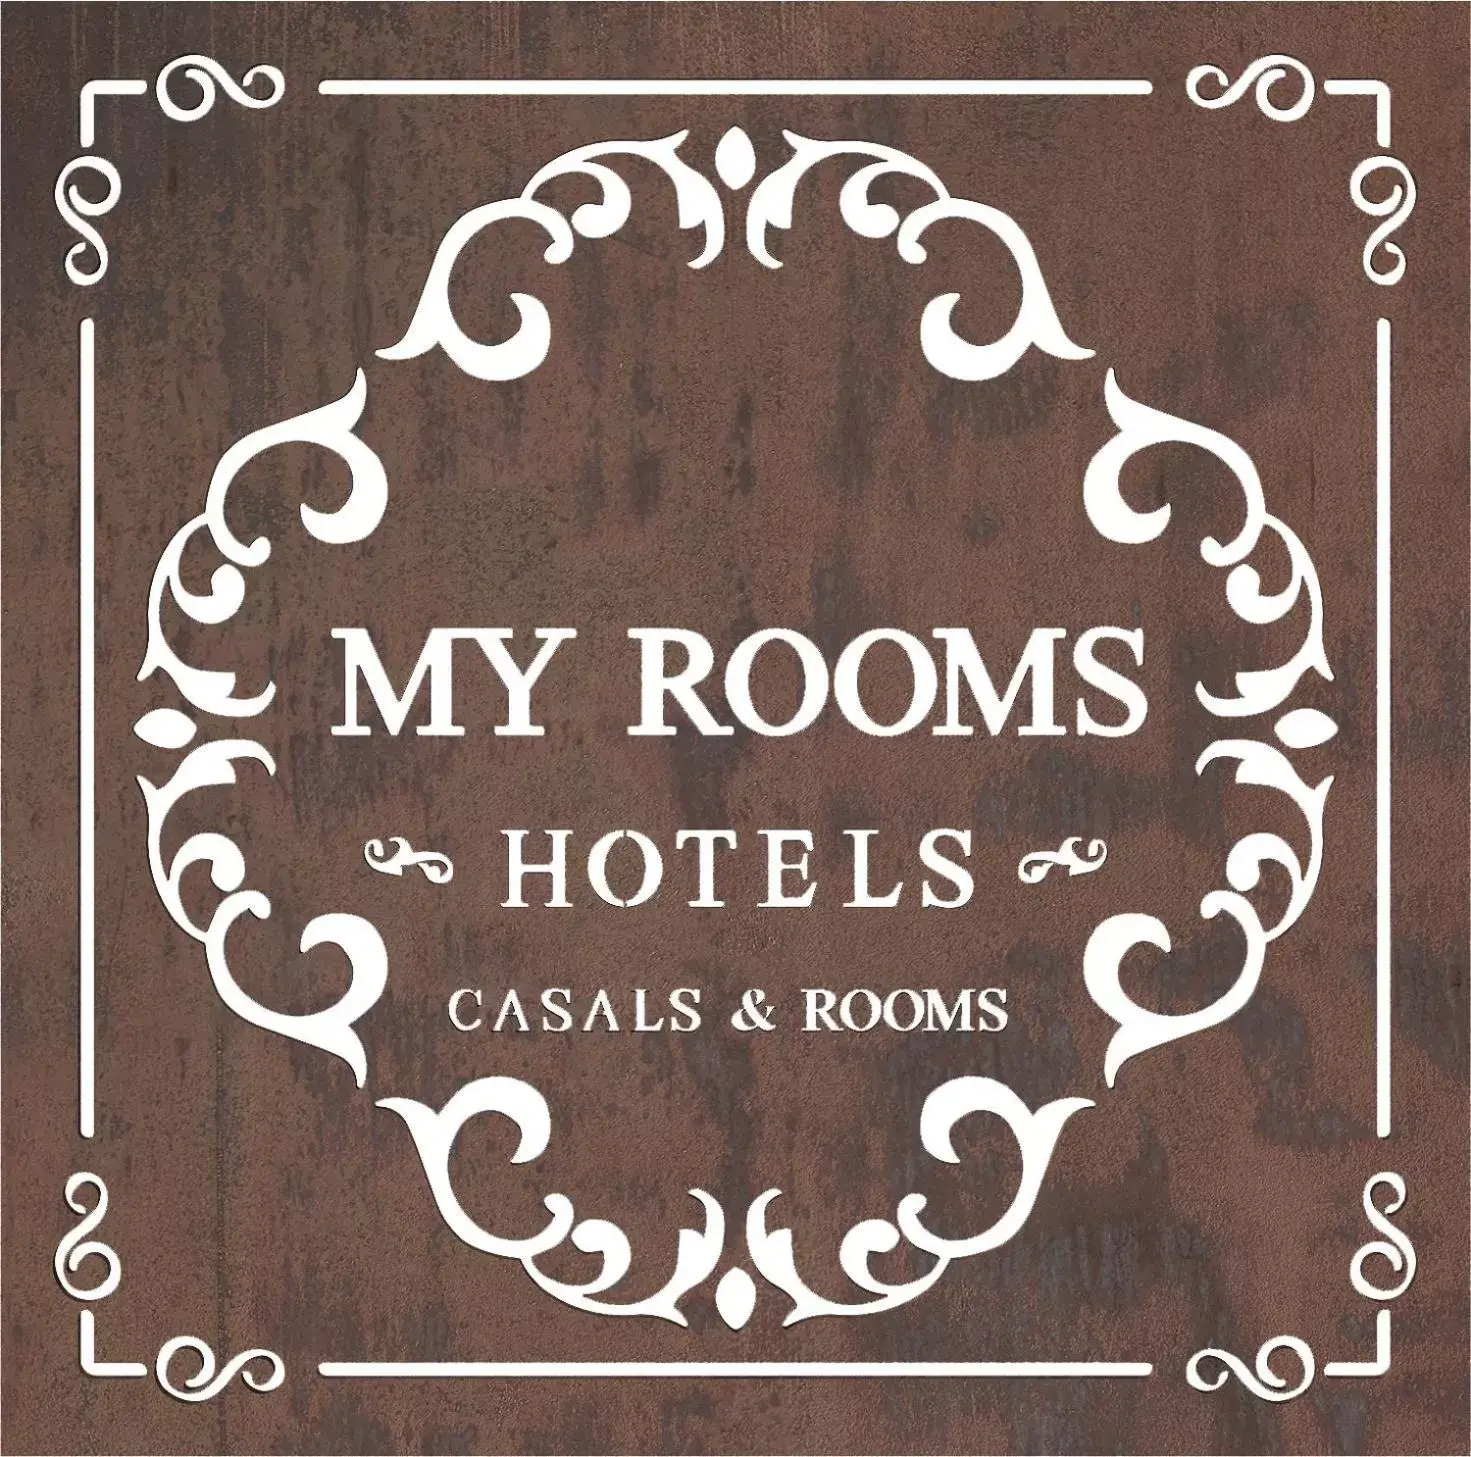 Logo/Certificate/Sign in Casal de Petra - Rooms & Pool by My Rooms Hotels